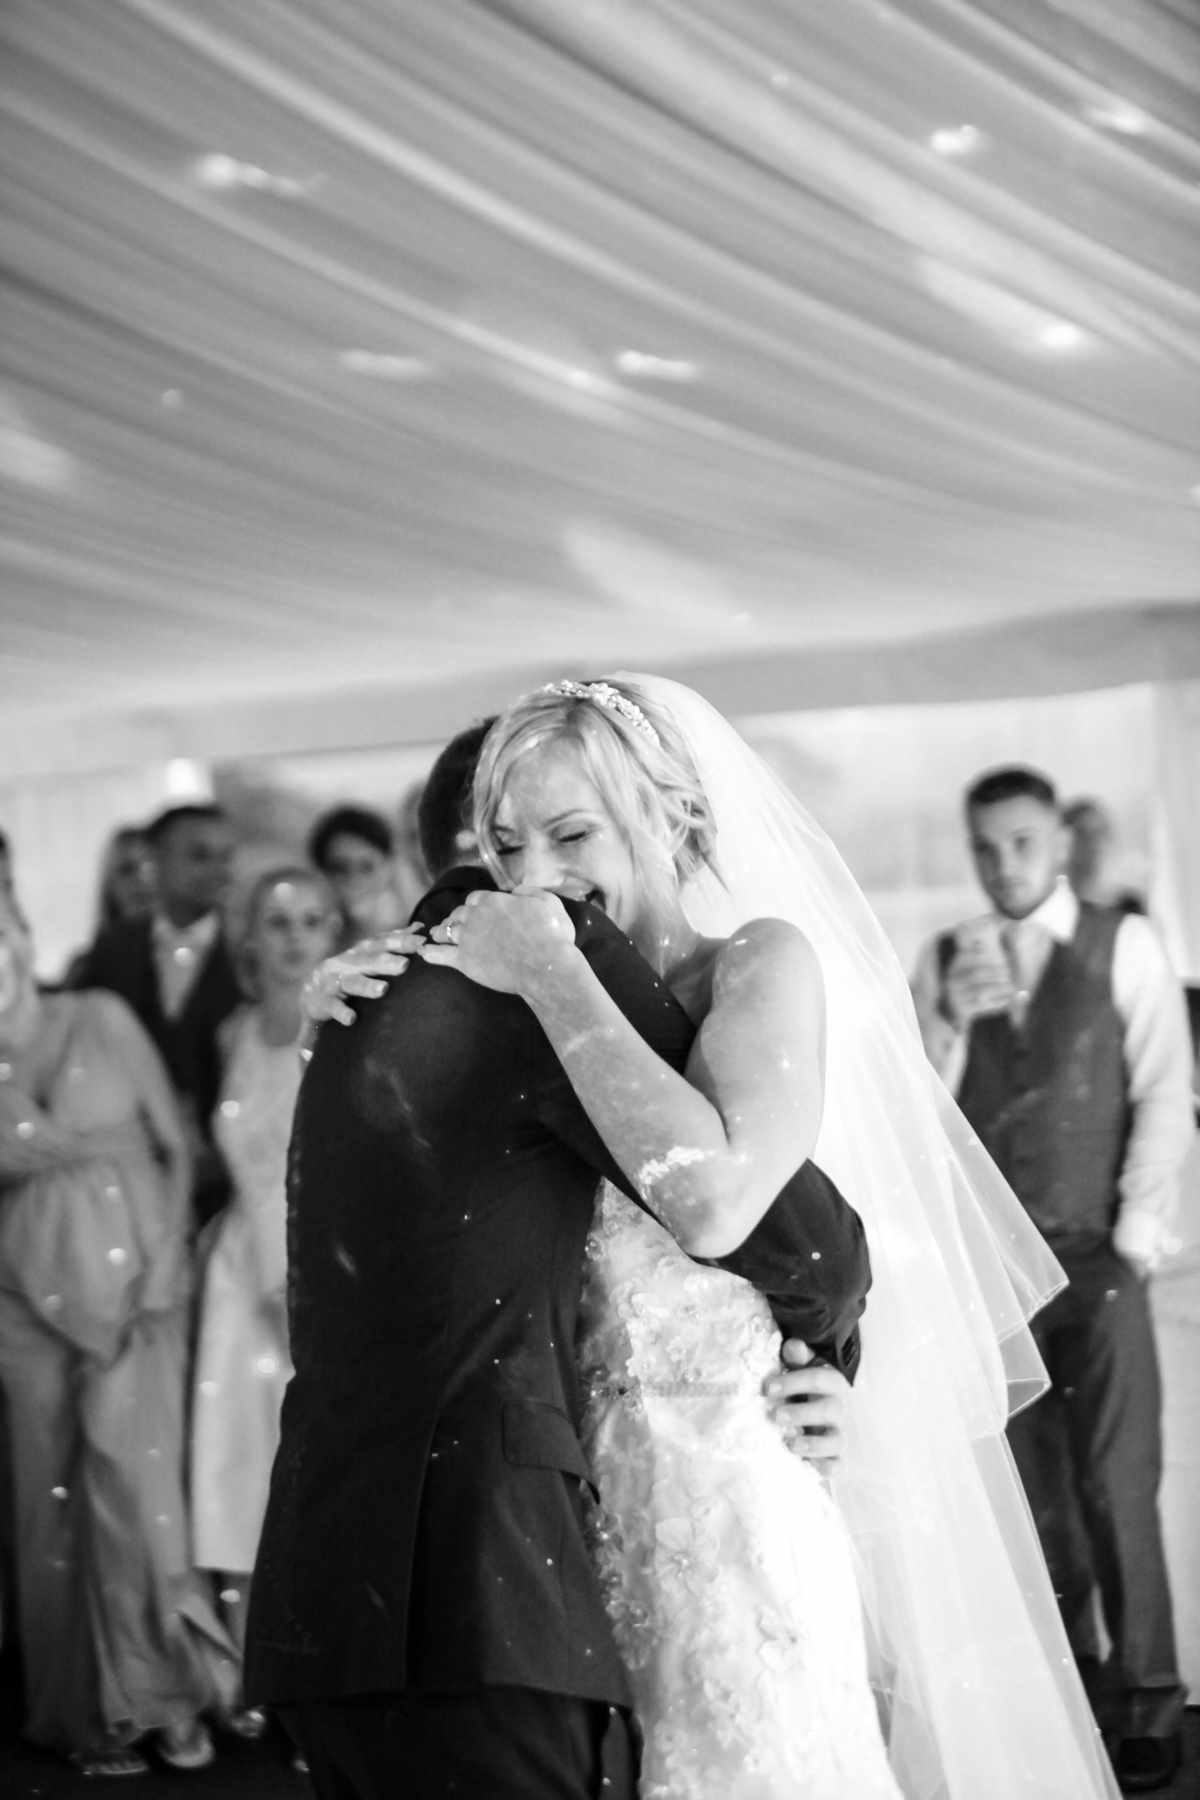 Bride holding onto her groom at her wedding whilst dancing. Romantic wedding photography.